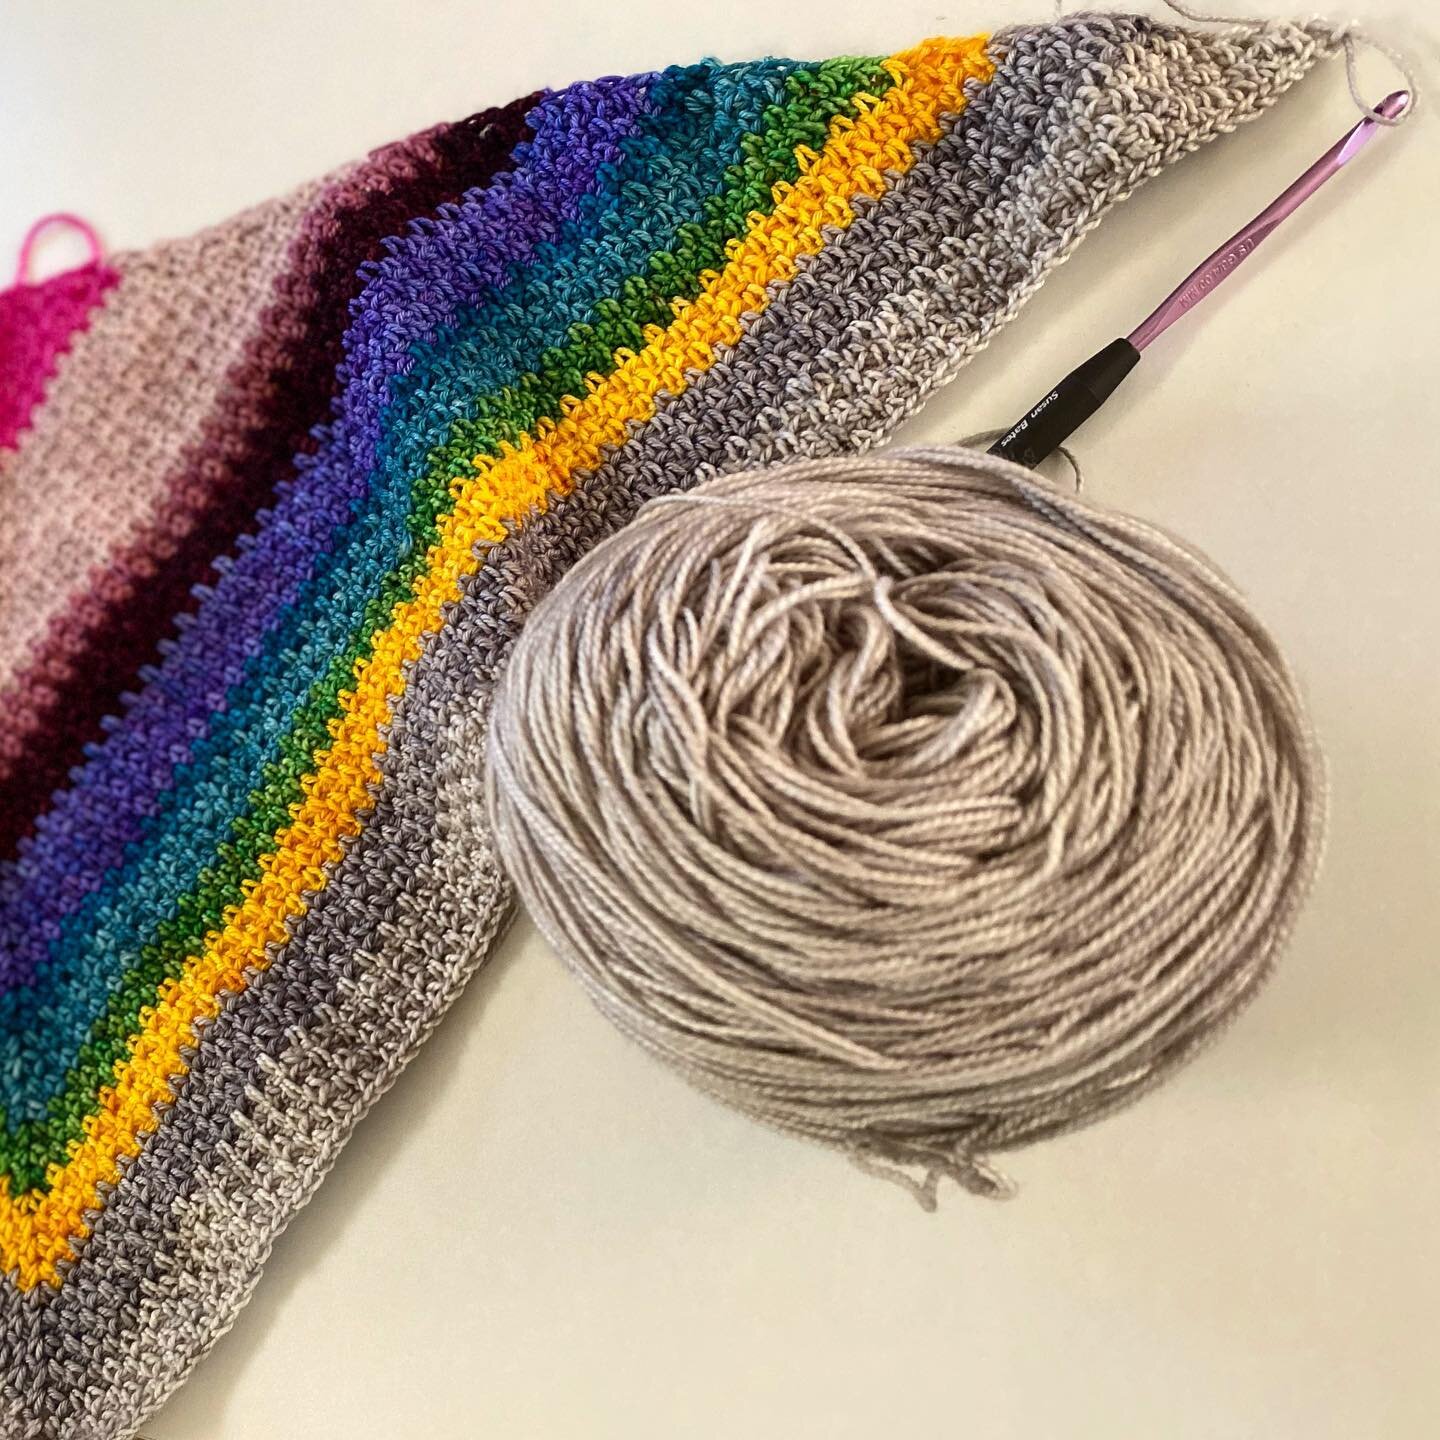 I&rsquo;m done with the base of this shawl. Built on beautiful scraps from my Box of Love shawl. Now adding in a fresh new skein.

Literally and metaphorically in love with this scrappy shawl right now.

You can take the beauty that&rsquo;s leftover 